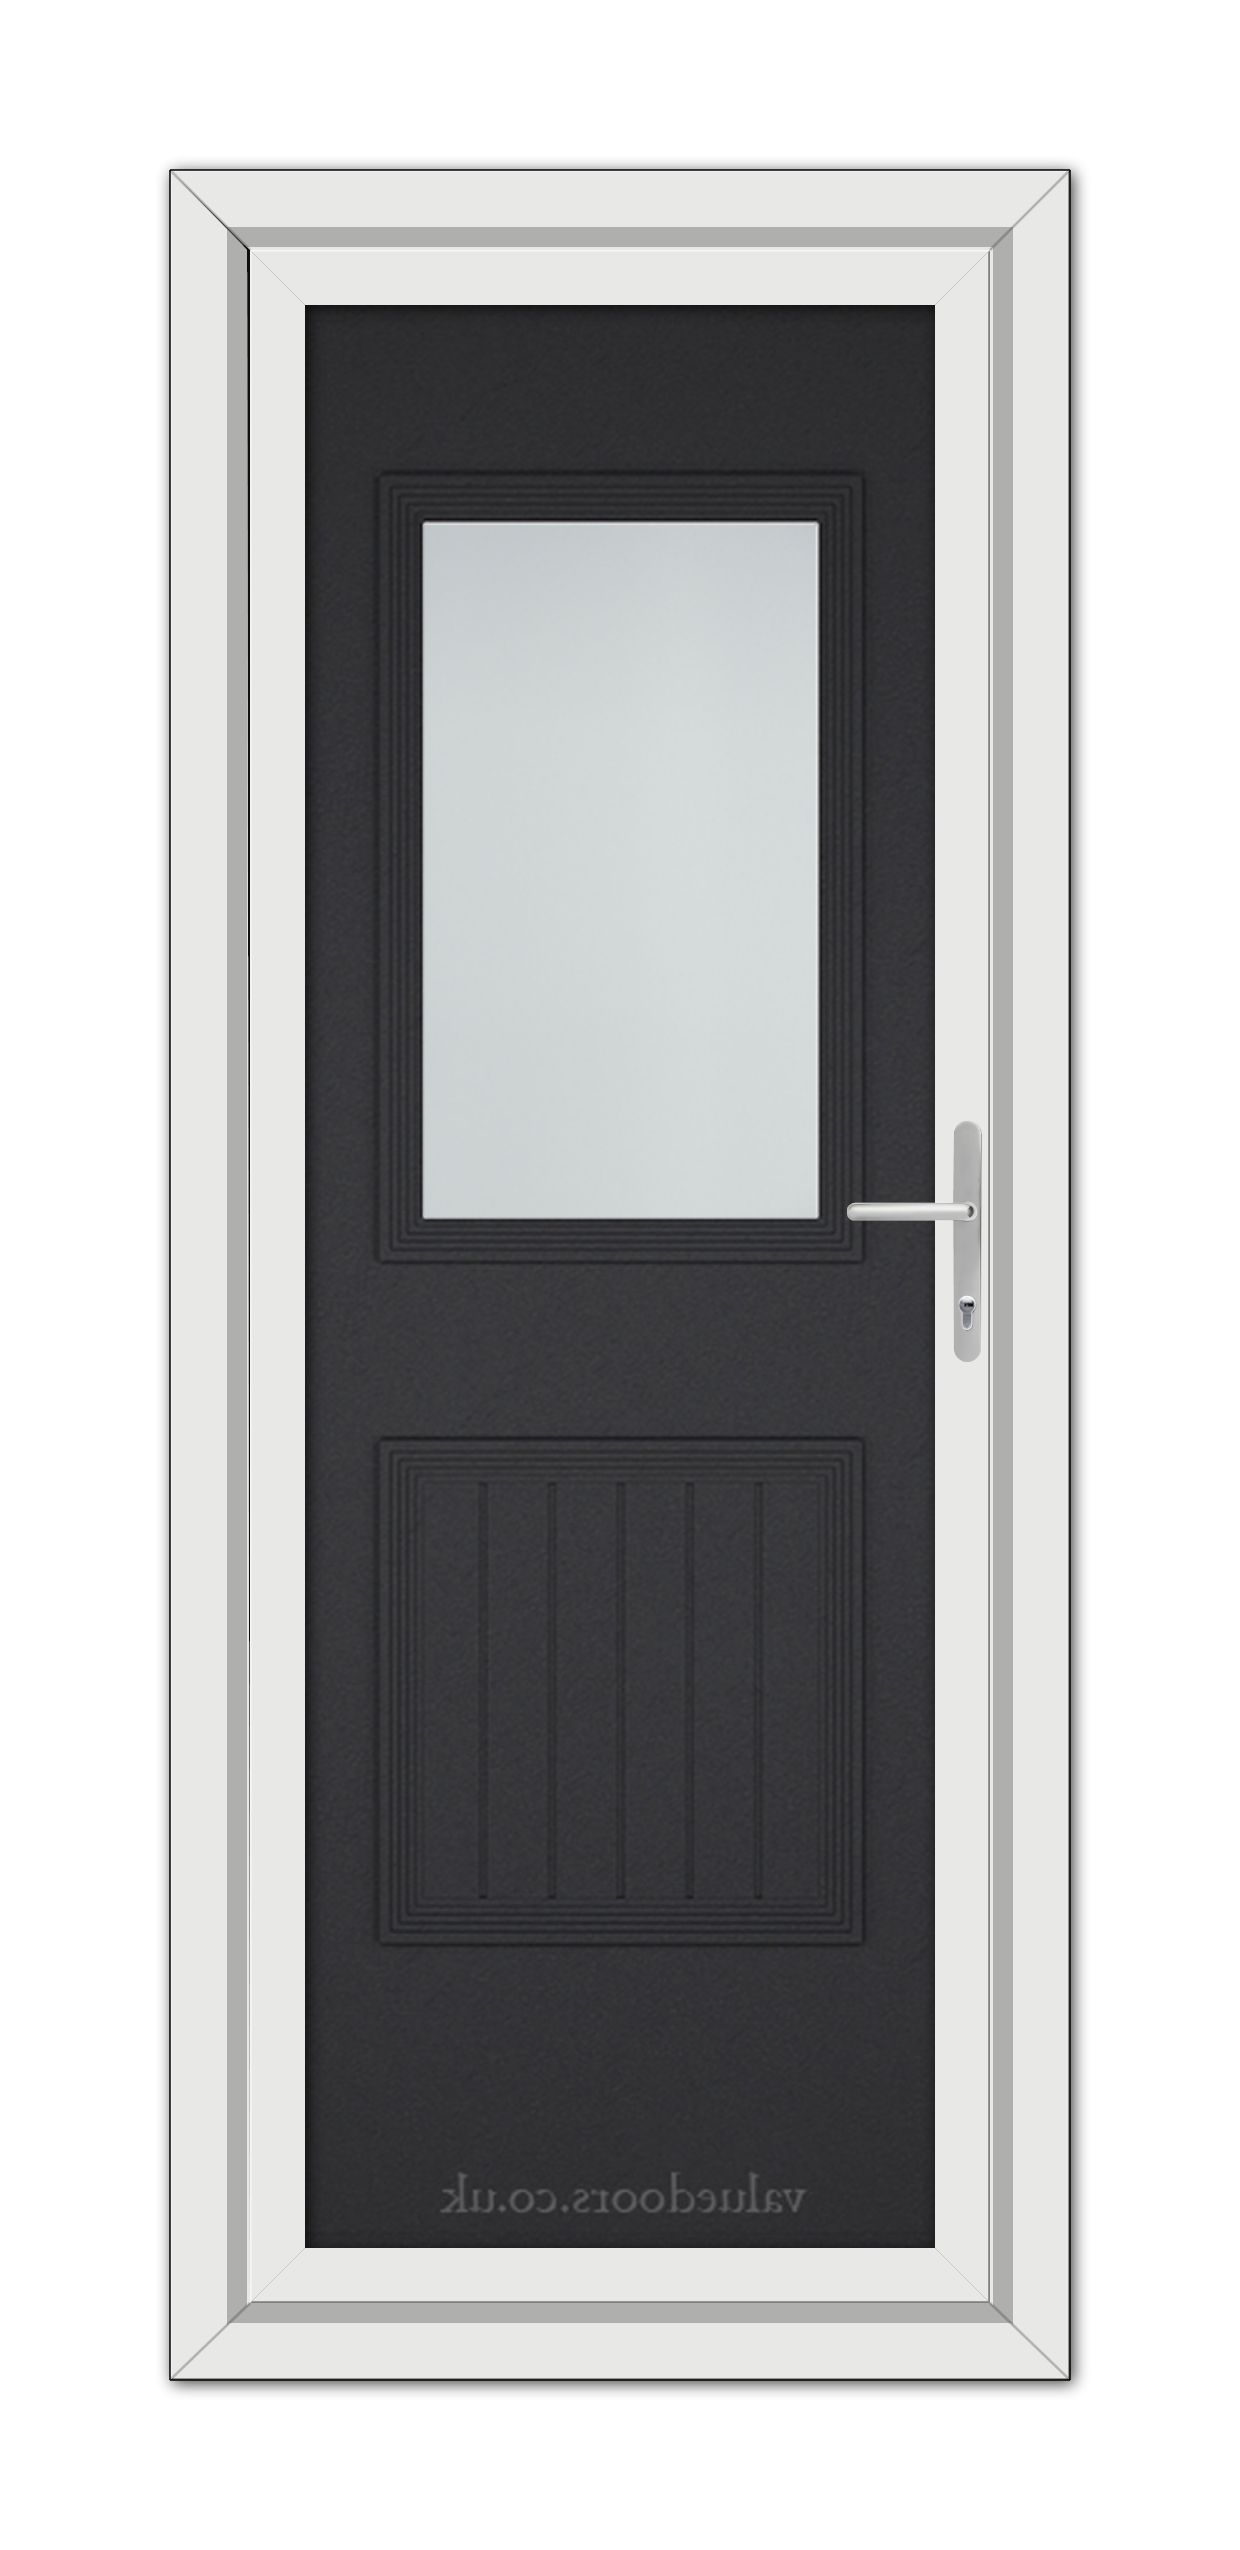 A modern black brown Alnwick One uPVC door with a vertical window, silver handle, and white frame, viewed from the front.